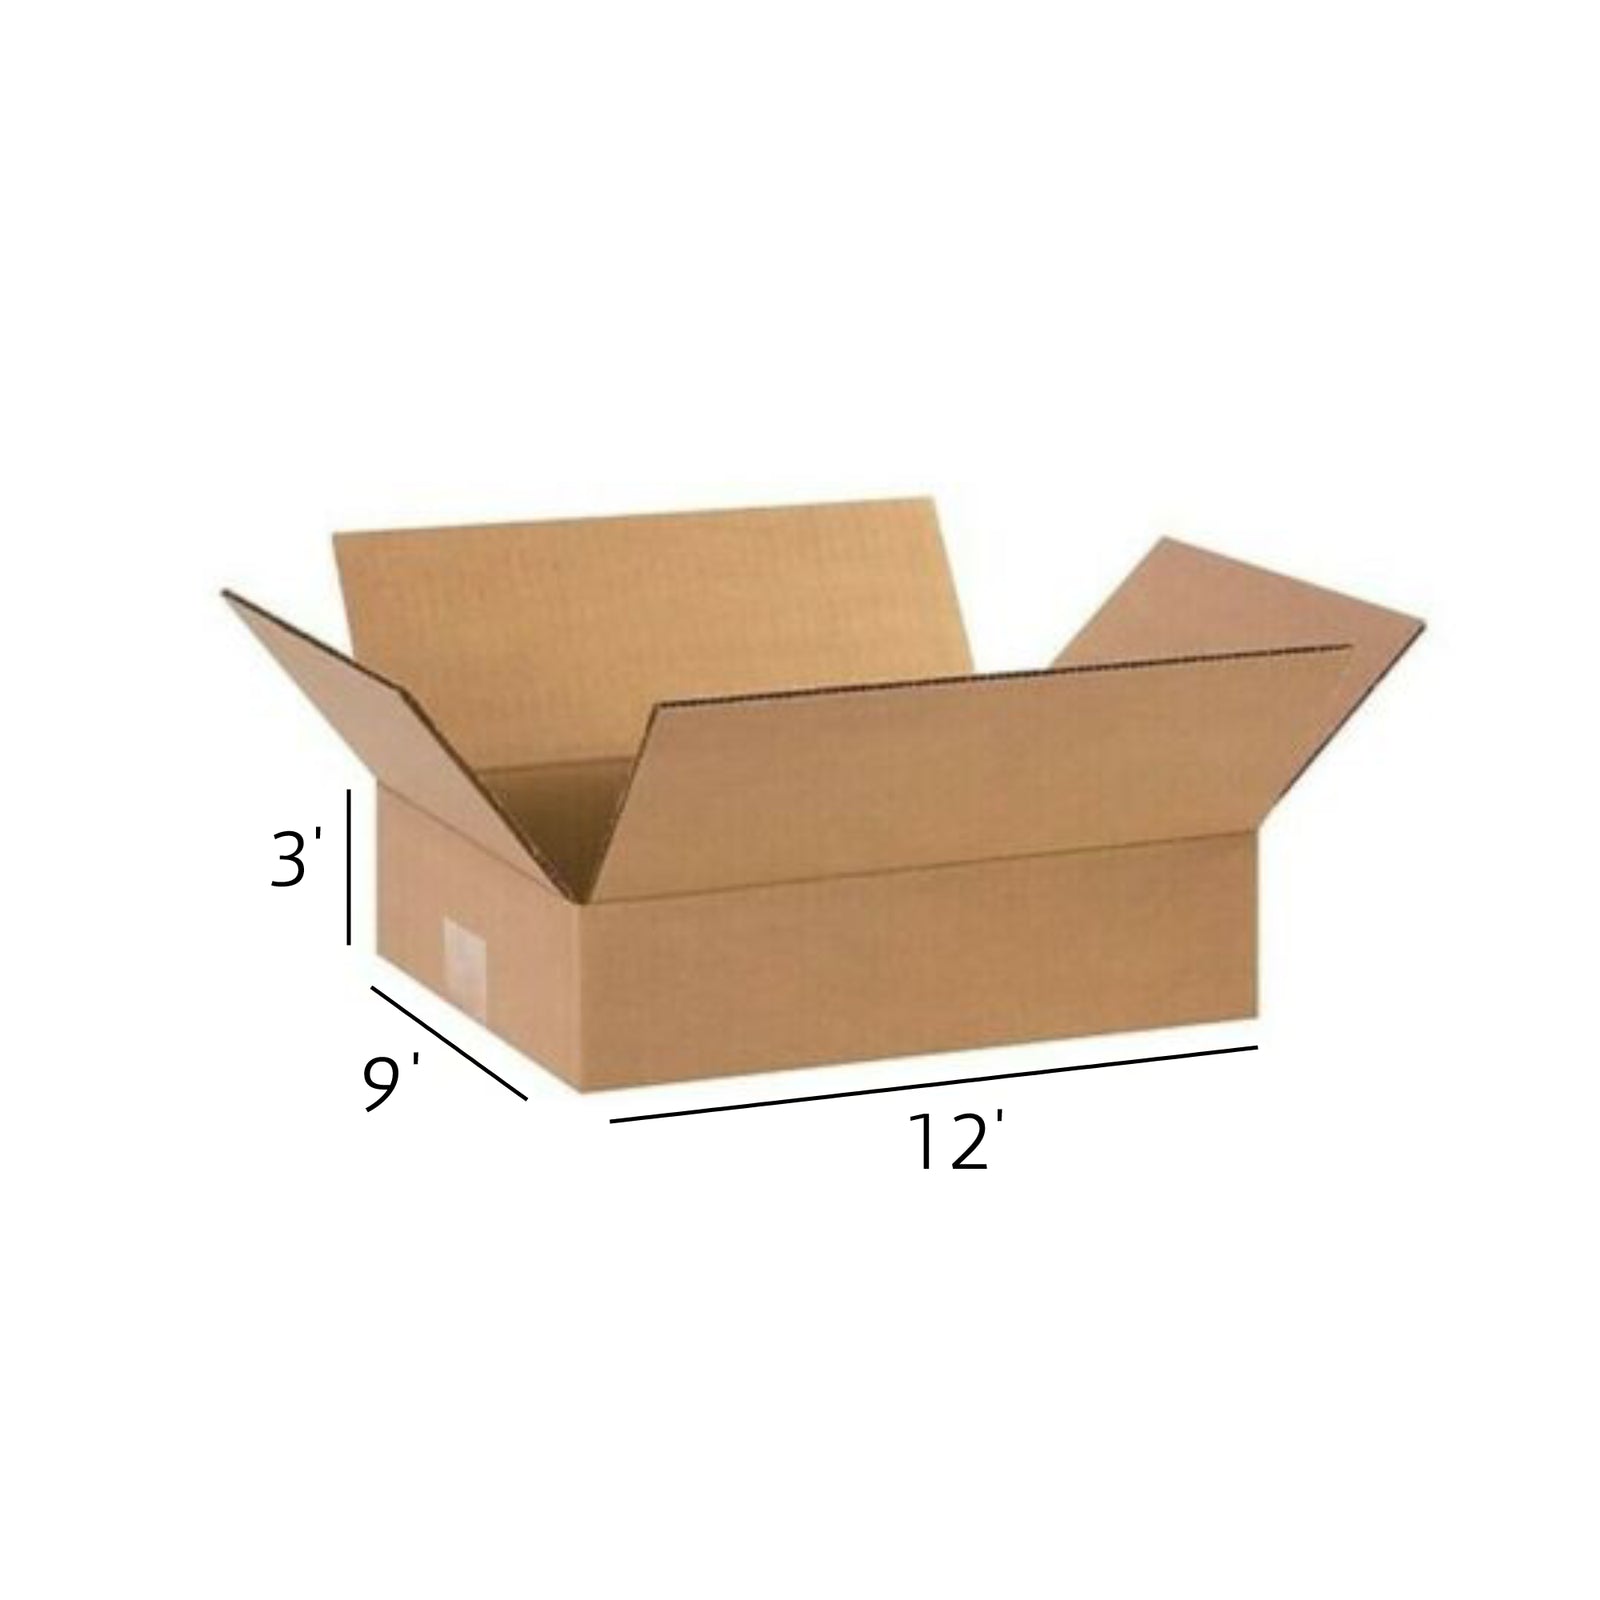 cardboard box, cardboard boxes for moving, cardboard boxes uk, cardboard boxes for sale, large cardboard box, shipping box, buy cardboard box online, cardboard box amazon, cardboard box ebay